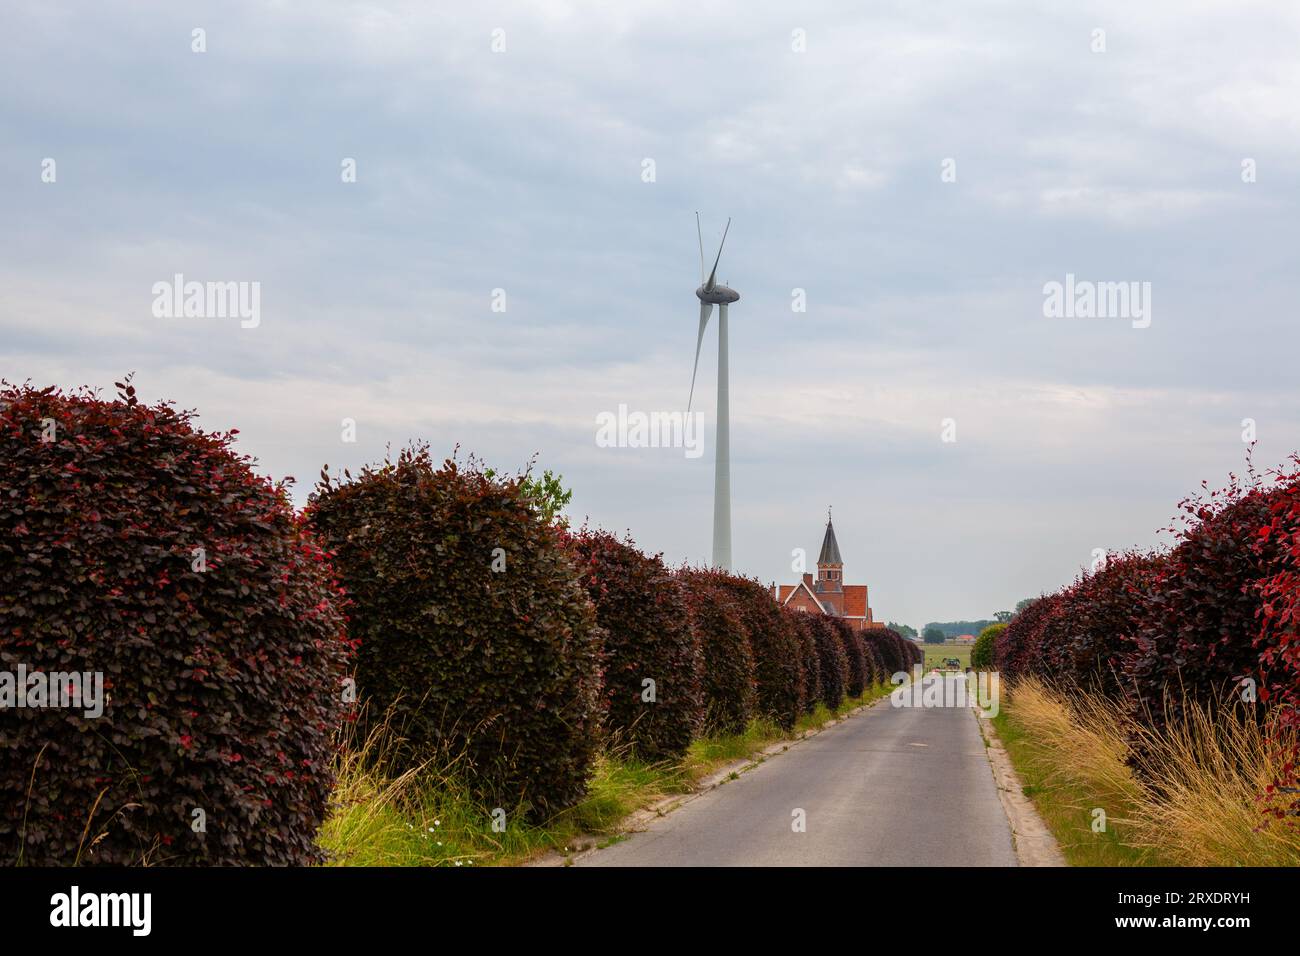 On the end of the road, there is a Windmill on a cloudy day Stock Photo